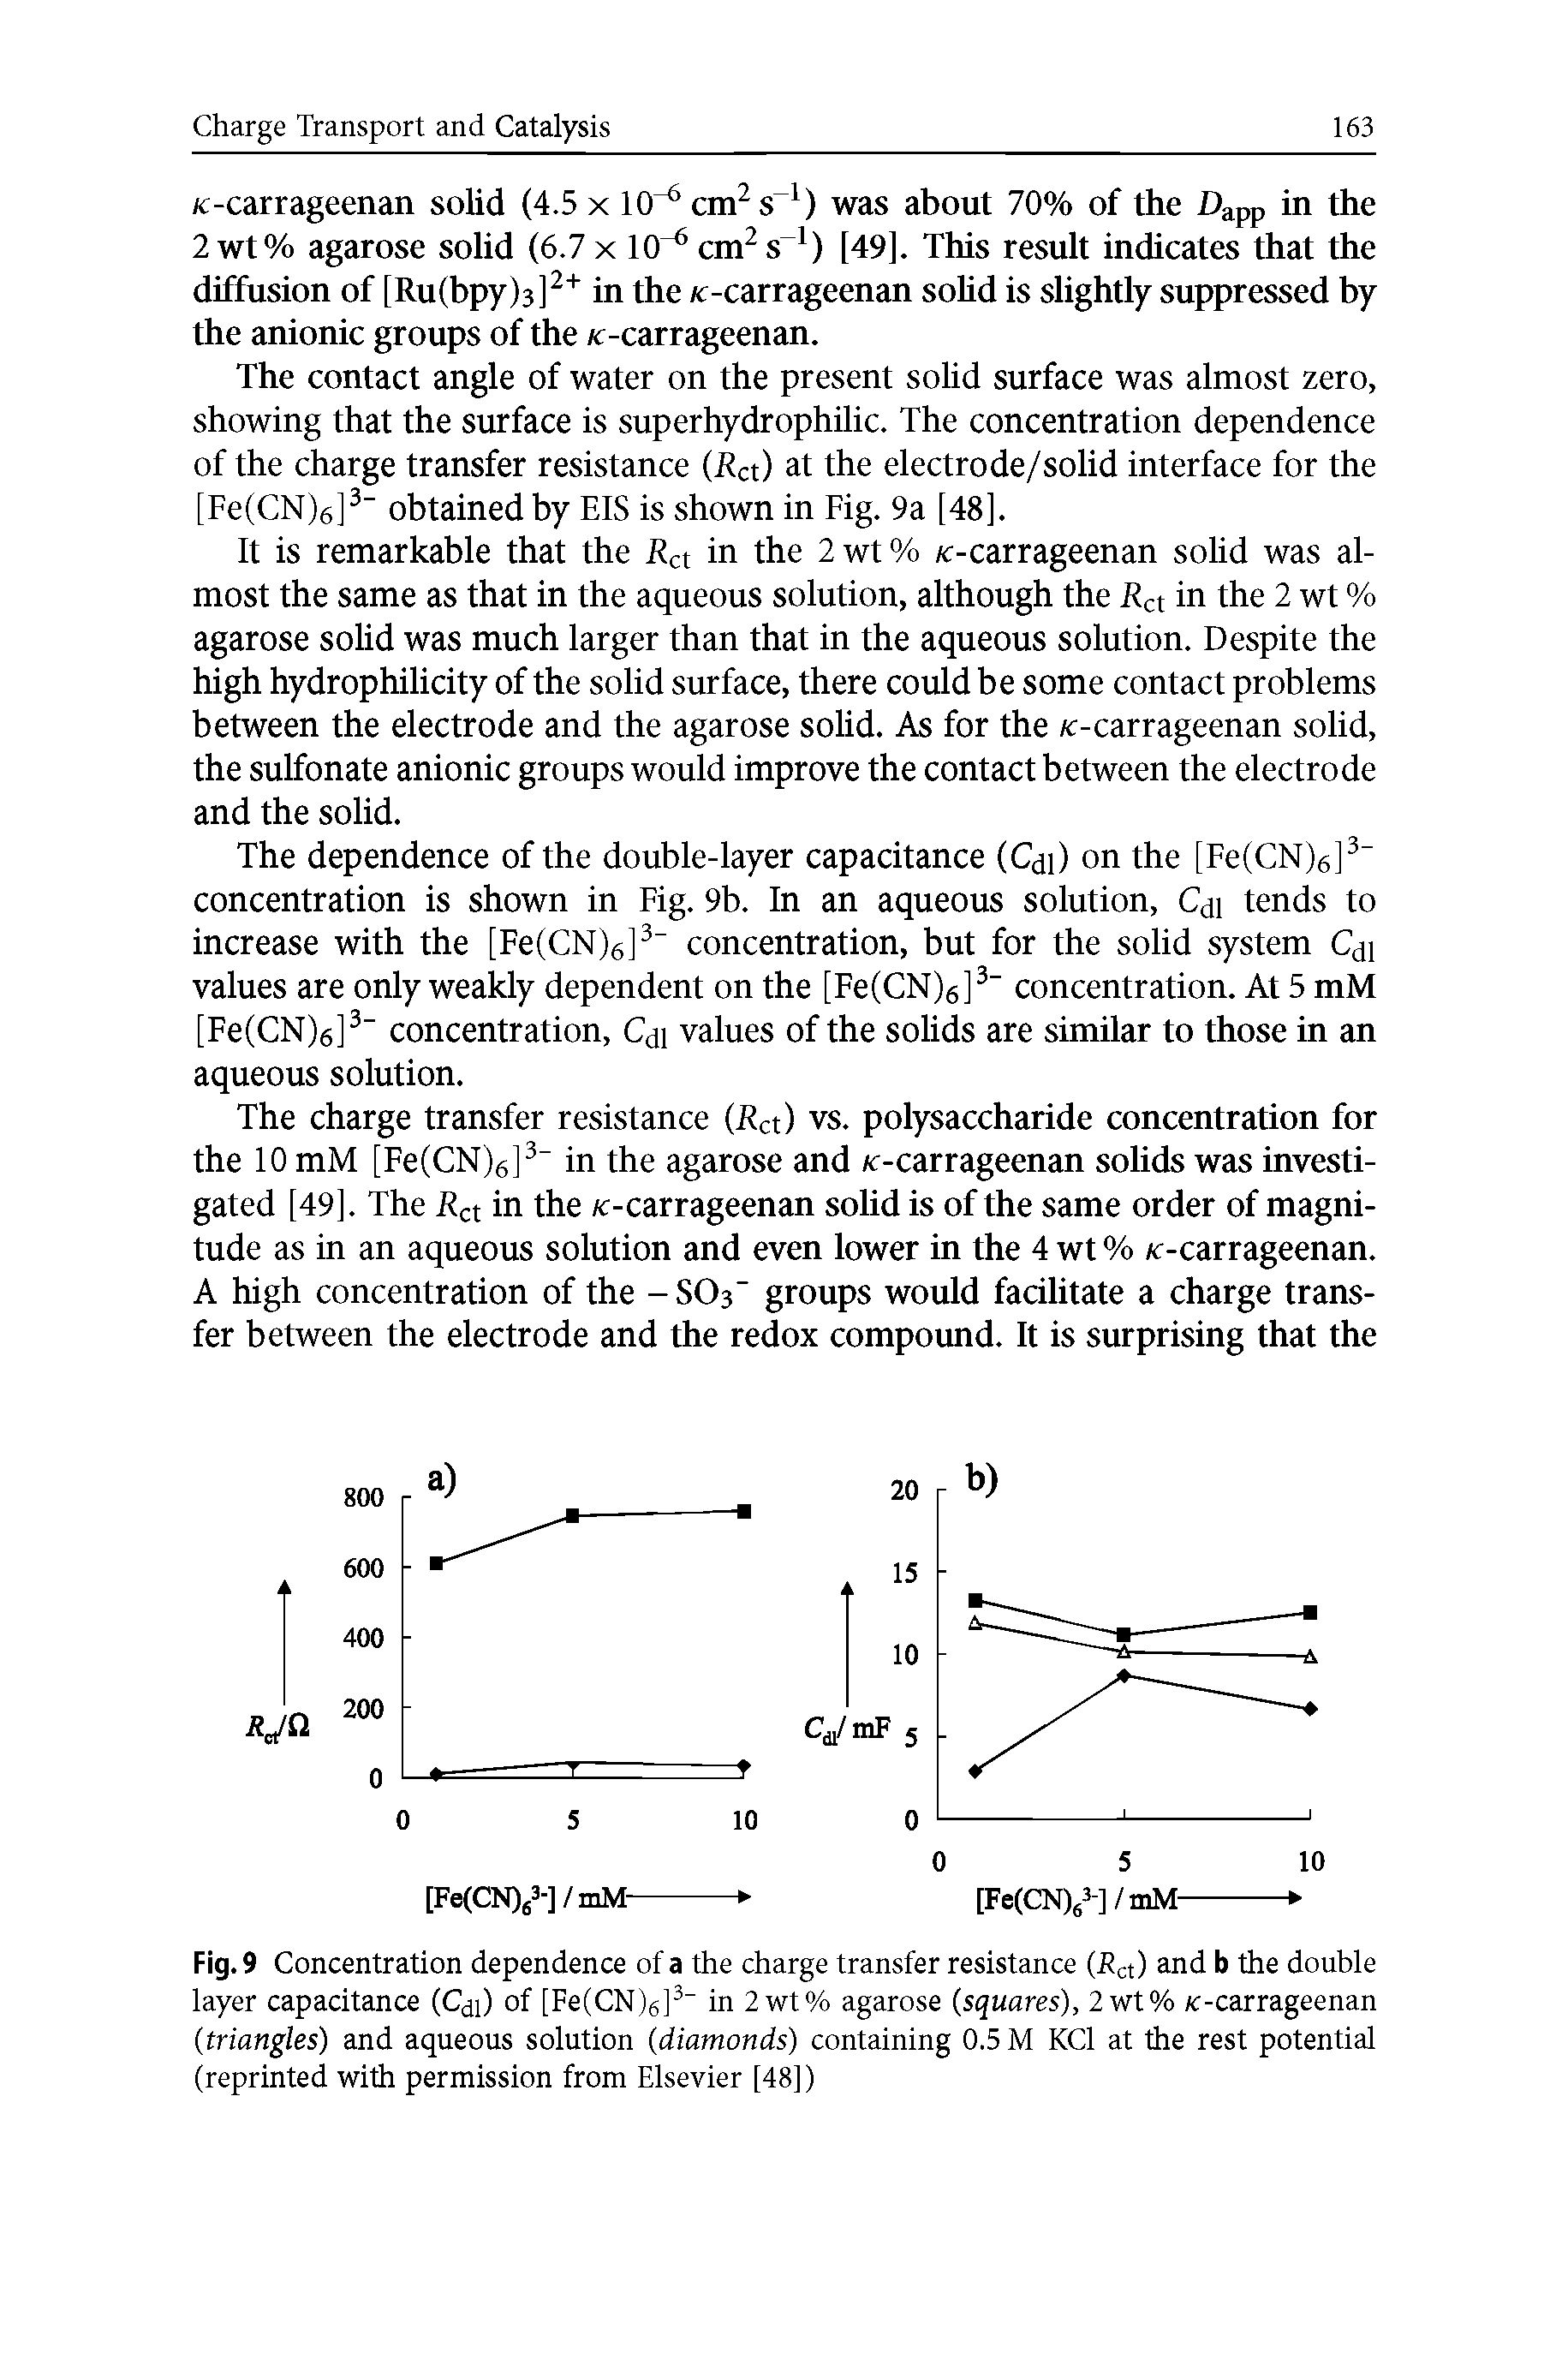 Fig. 9 Concentration dependence of a the charge transfer resistance (Ret) and b the double layer capacitance (Cdi) of [FelCNig] " in 2 wt% agarose (squares), 2 wt% /c-carrageenan (triangles) and aqueous solution (diamonds) containing 0.5 M KCl at the rest potential (reprinted with permission from Elsevier [48])...